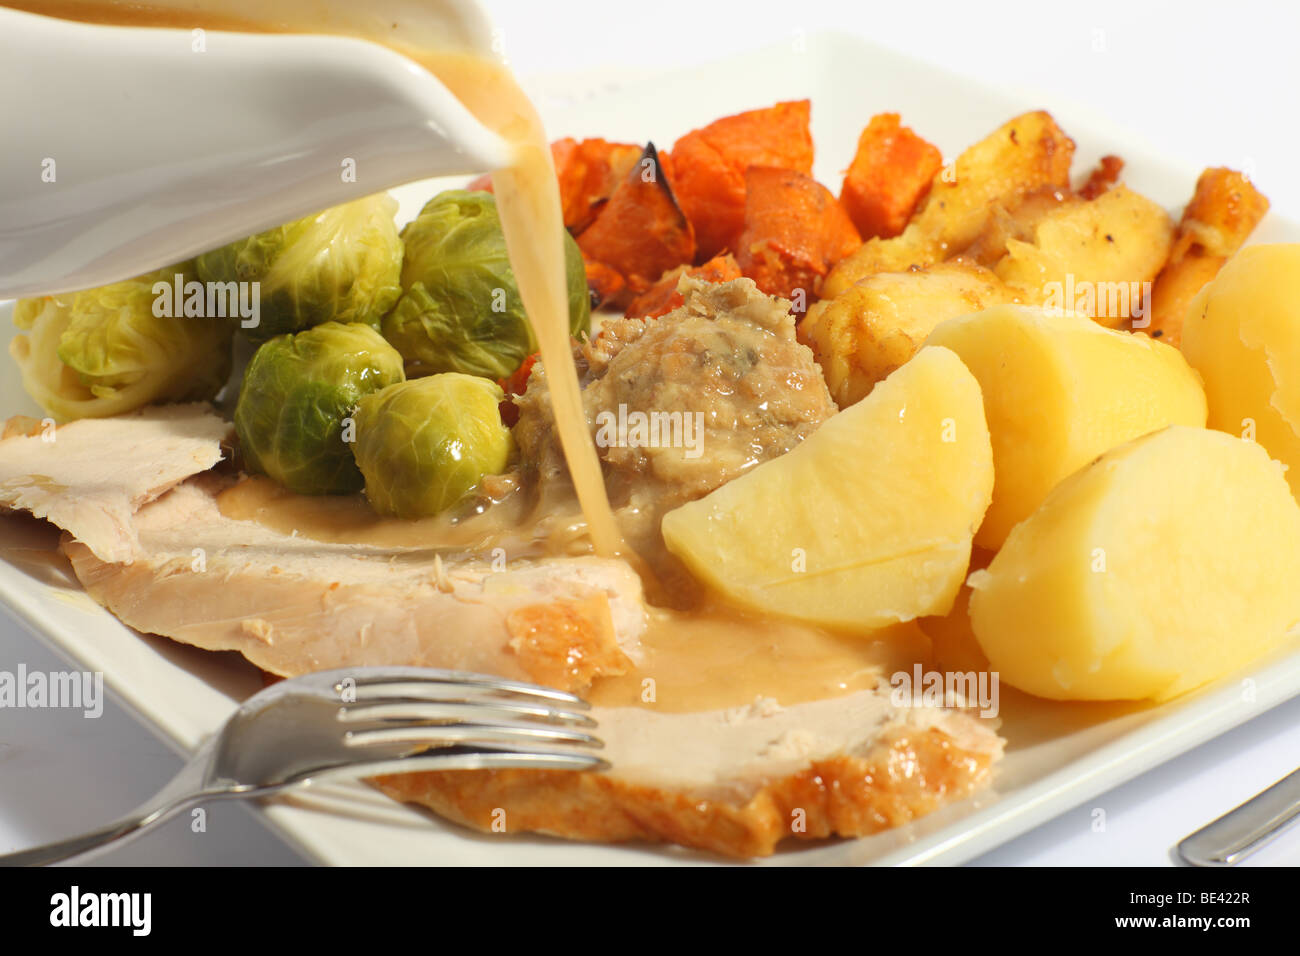 Pouring gravy on a festive turkey meal, with roast yams, roast parsnips, boiled potatoes and stuffing Stock Photo